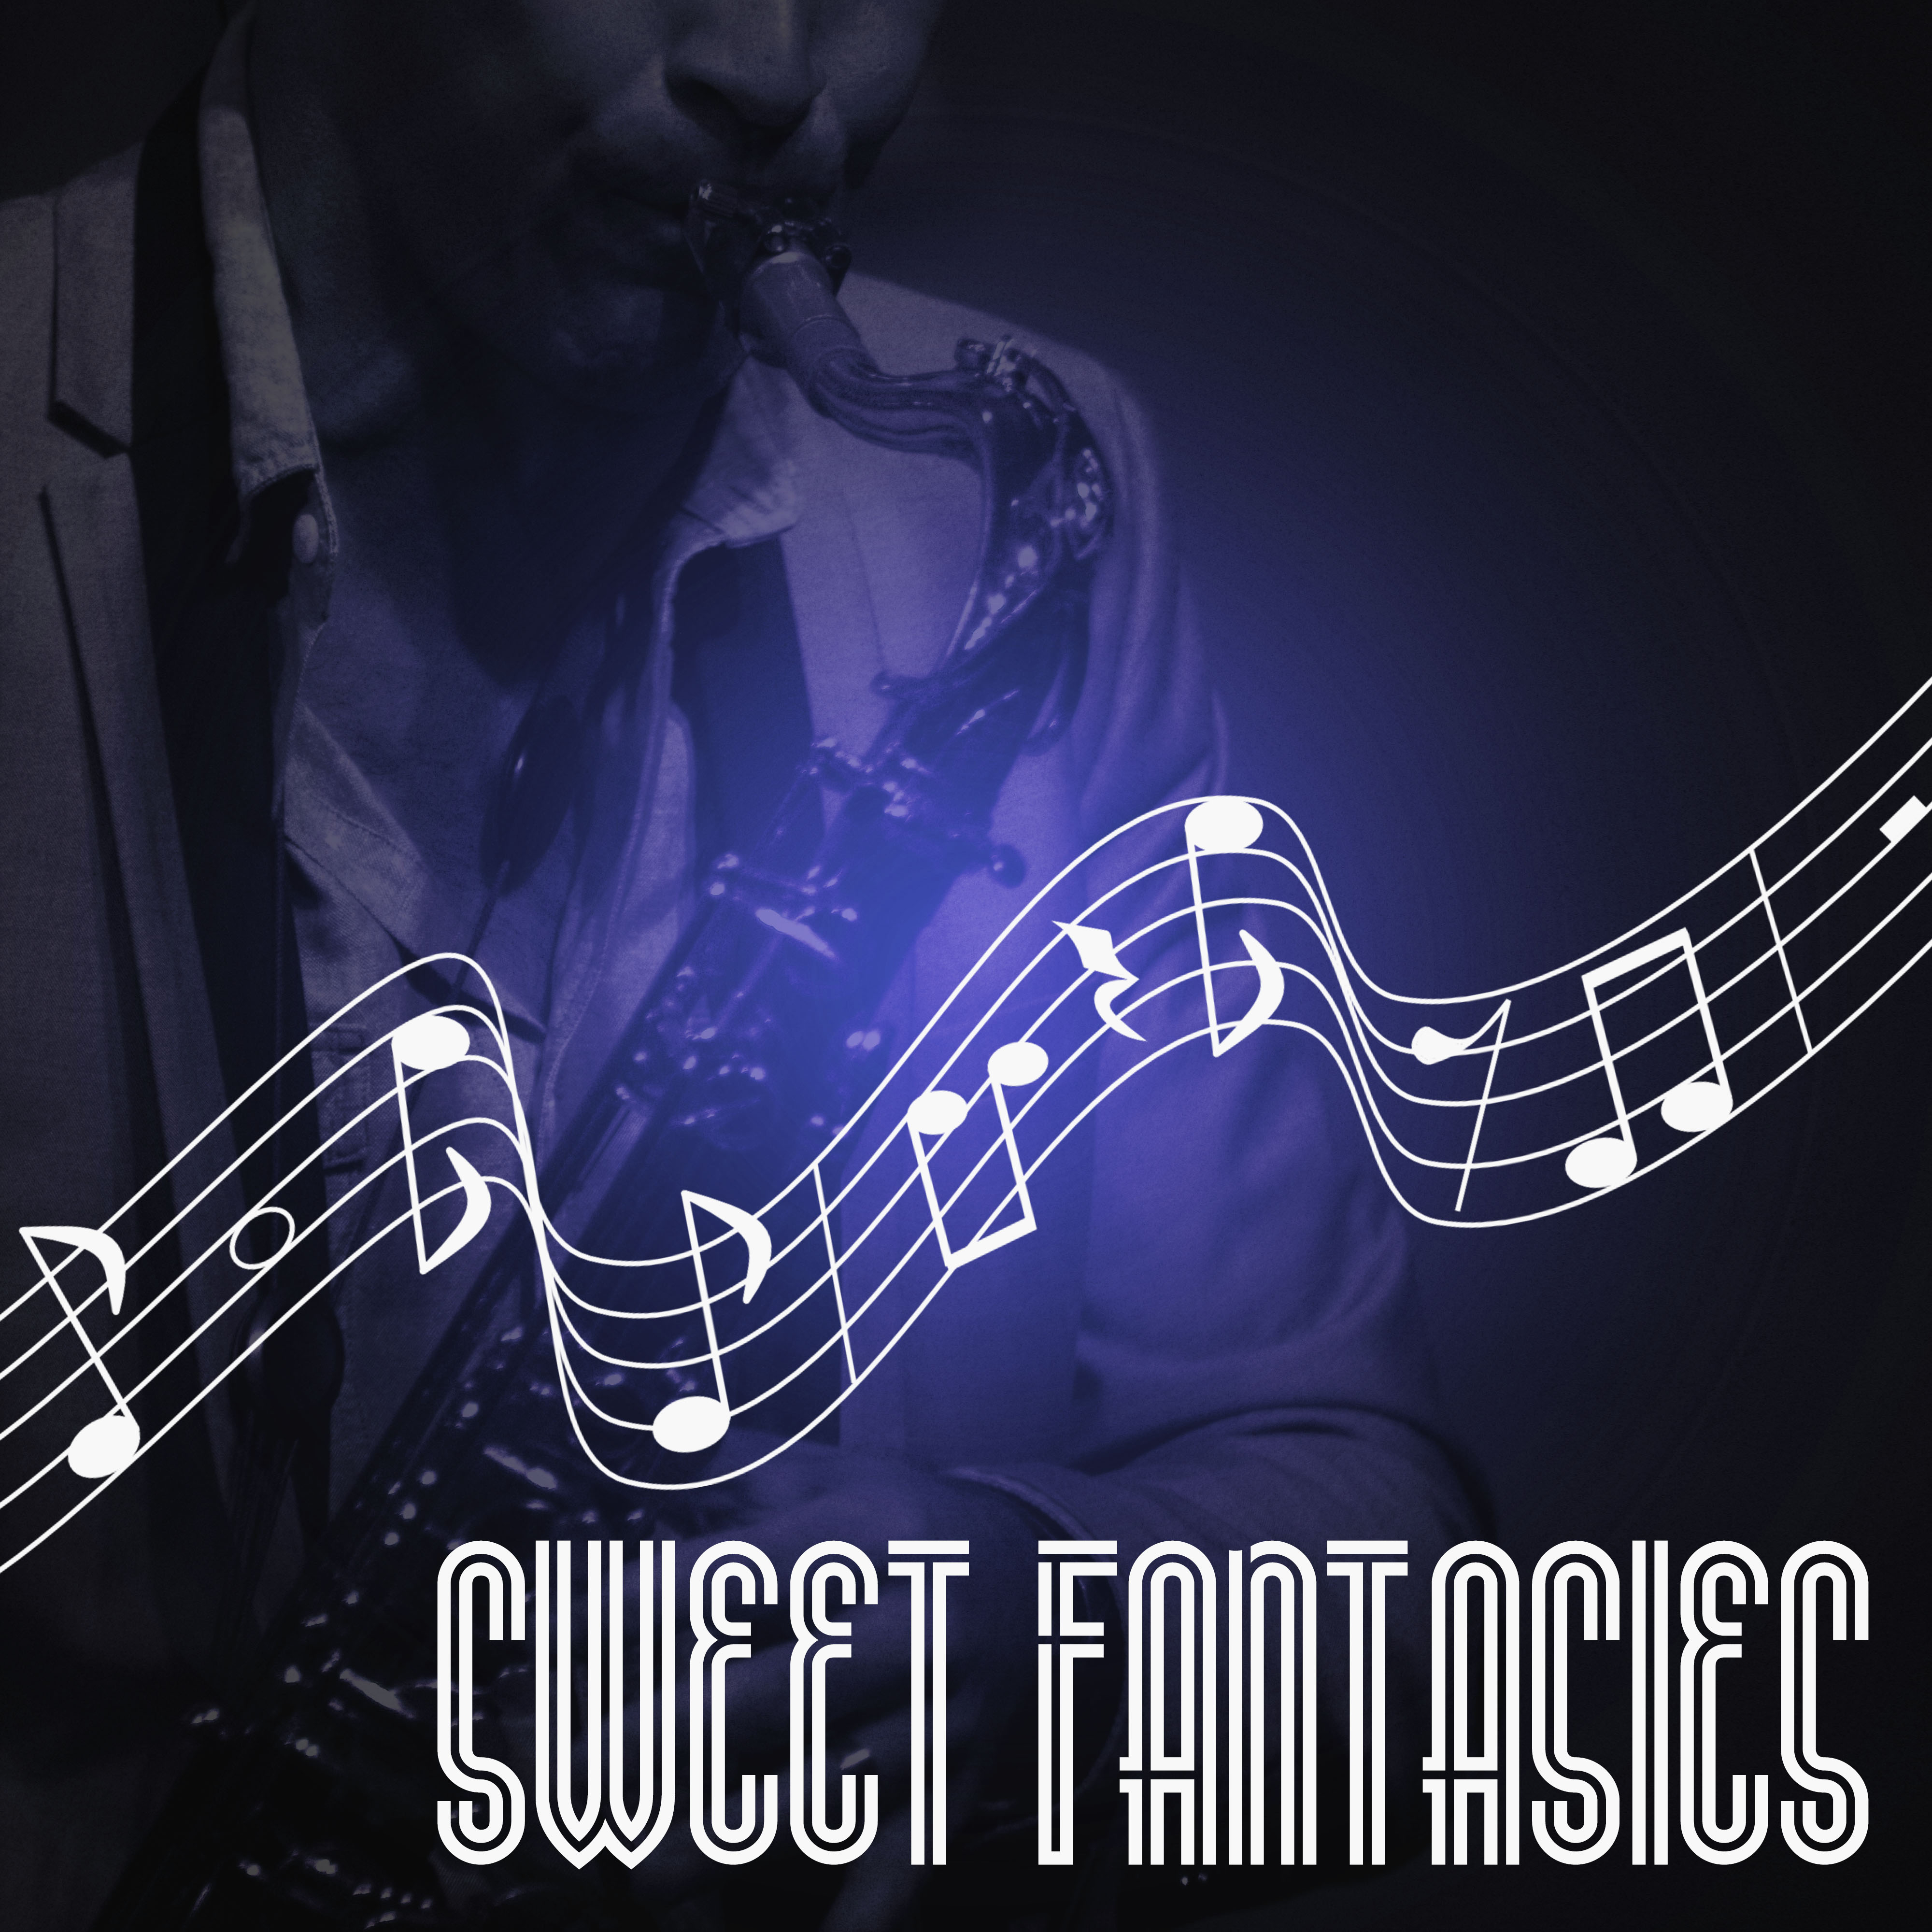 Sweet Fantasies – Soft Background Music, Cool Jazz Melodies, Instrumental Piano Songs for Reflections